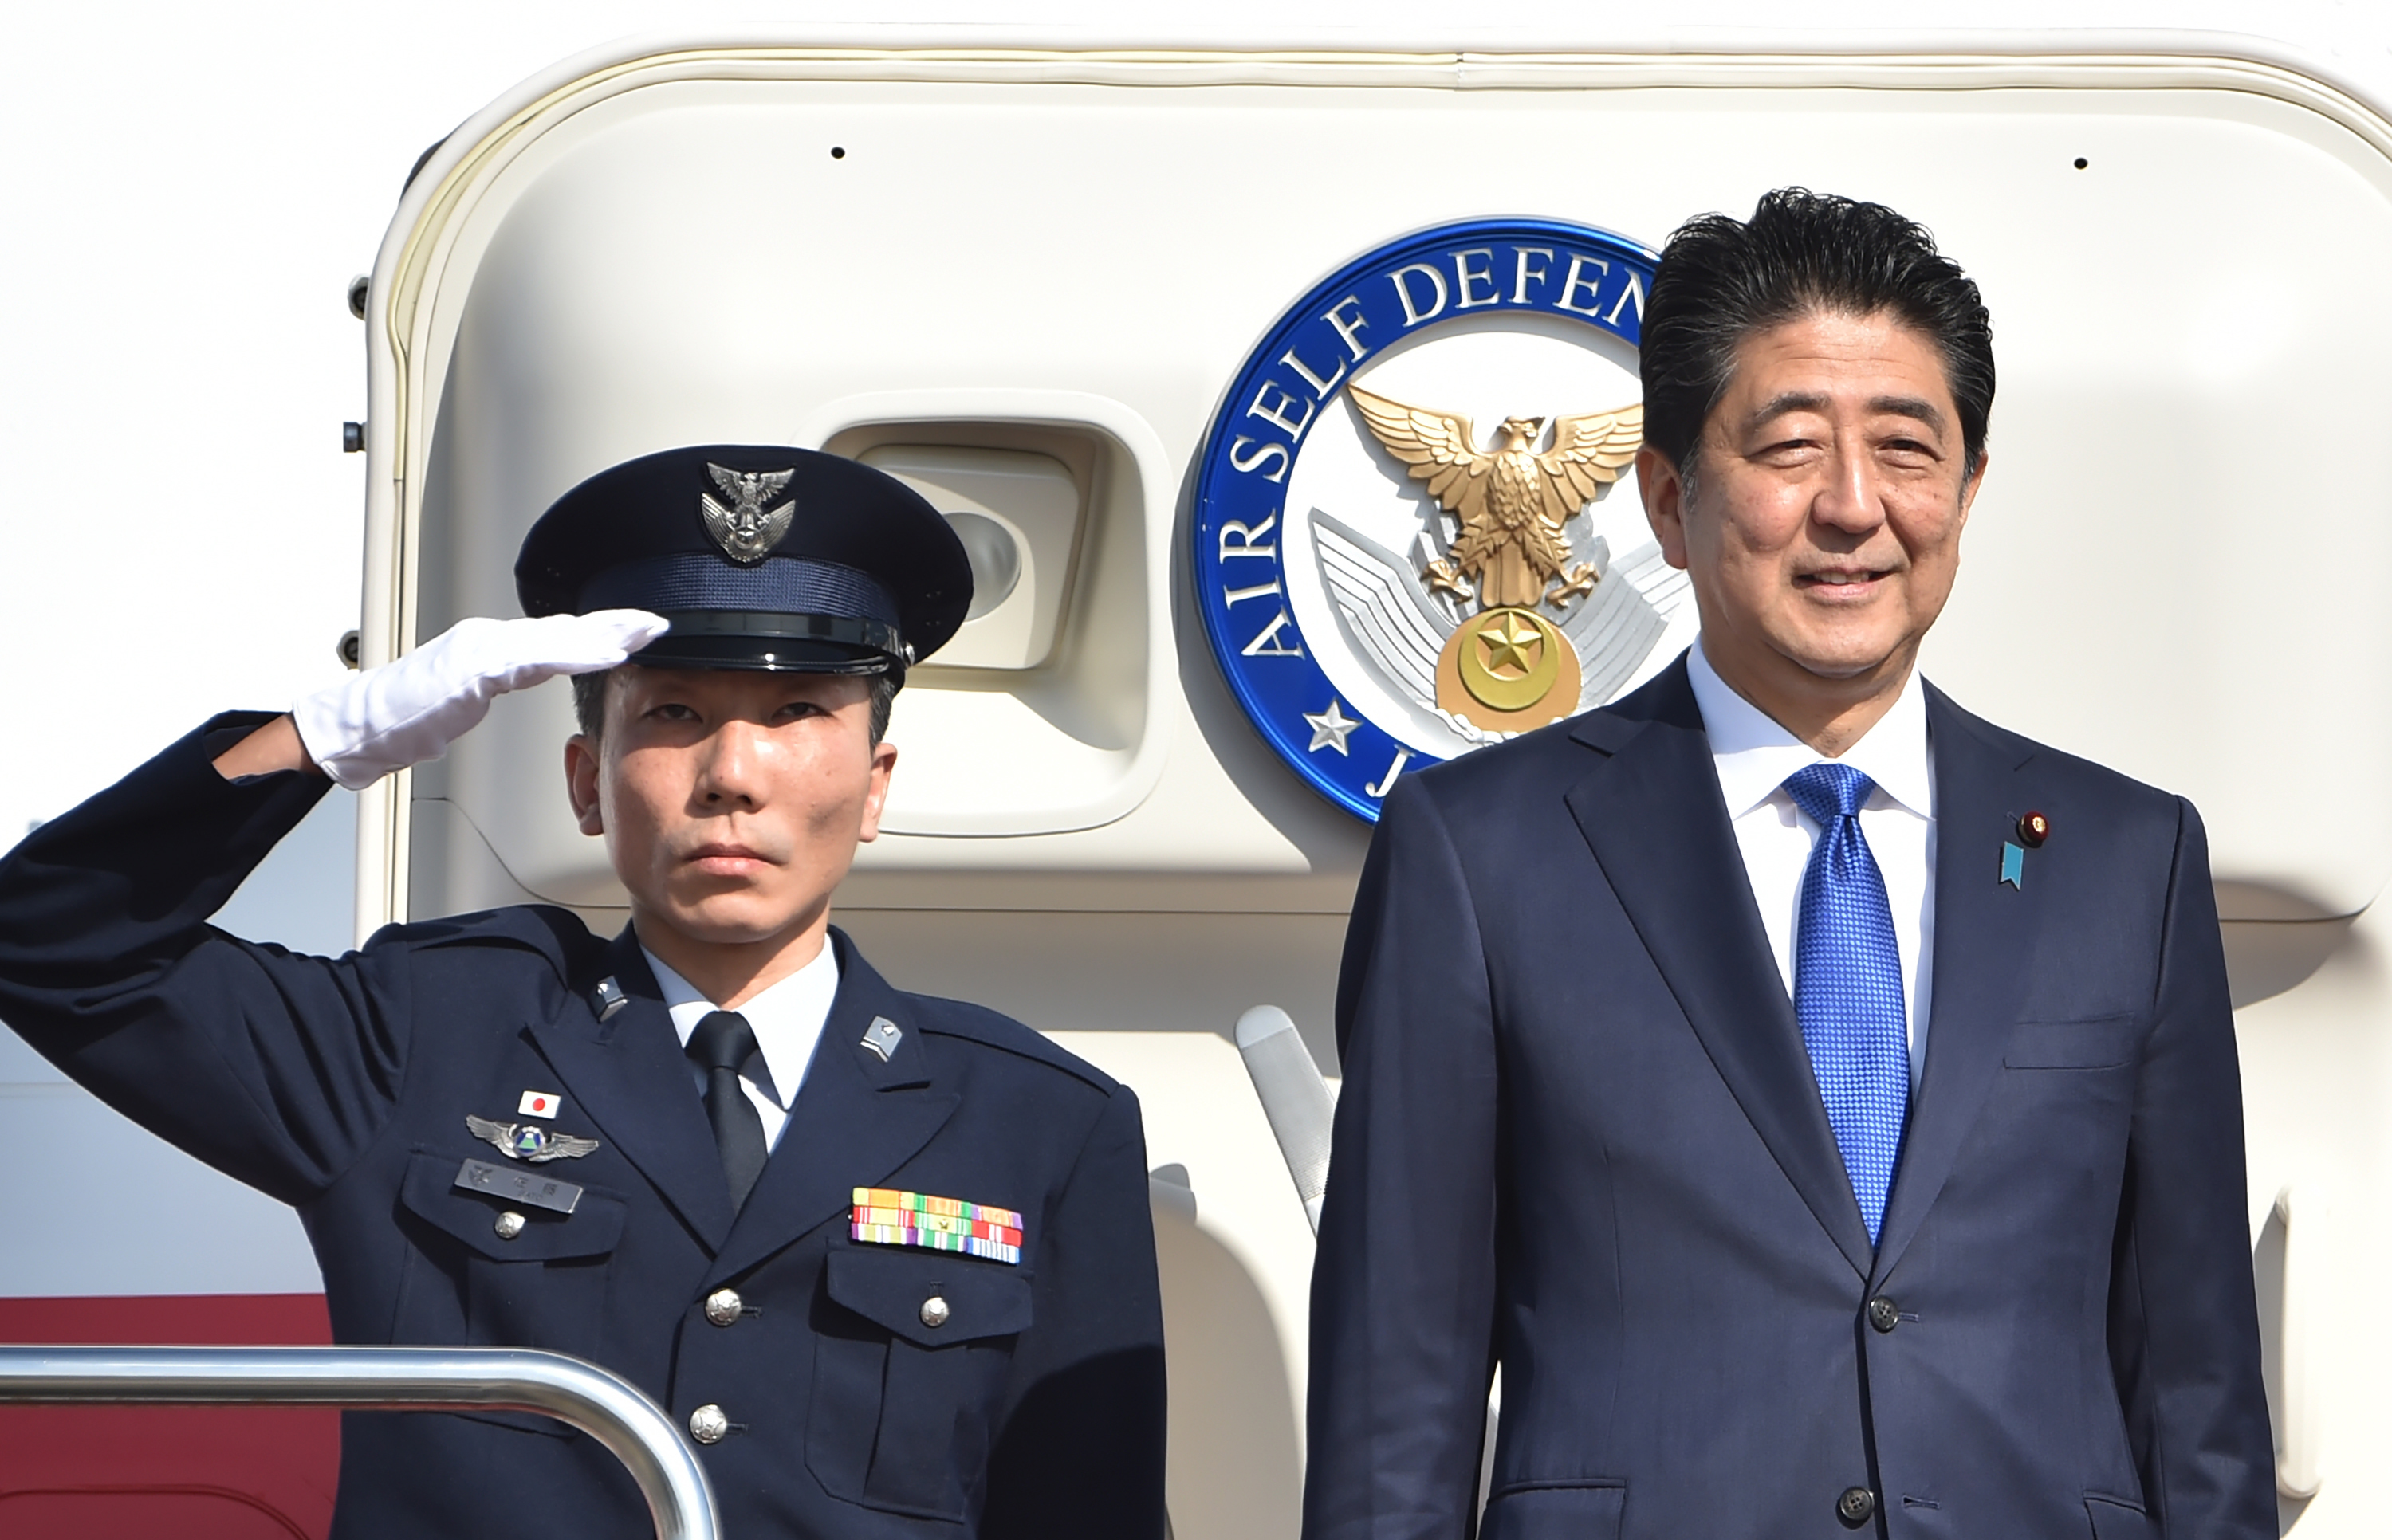 Japan's Prime Minister Shinzo Abe (R) leaves Tokyo's Haneda Airport on November 17, 2016.  Abe headed to New York on November 17 for talks with Donald Trump, the first leader to meet with the president-elect whose campaign pledges provoked anxiety over US foreign policy. / AFP PHOTO / KAZUHIRO NOGI